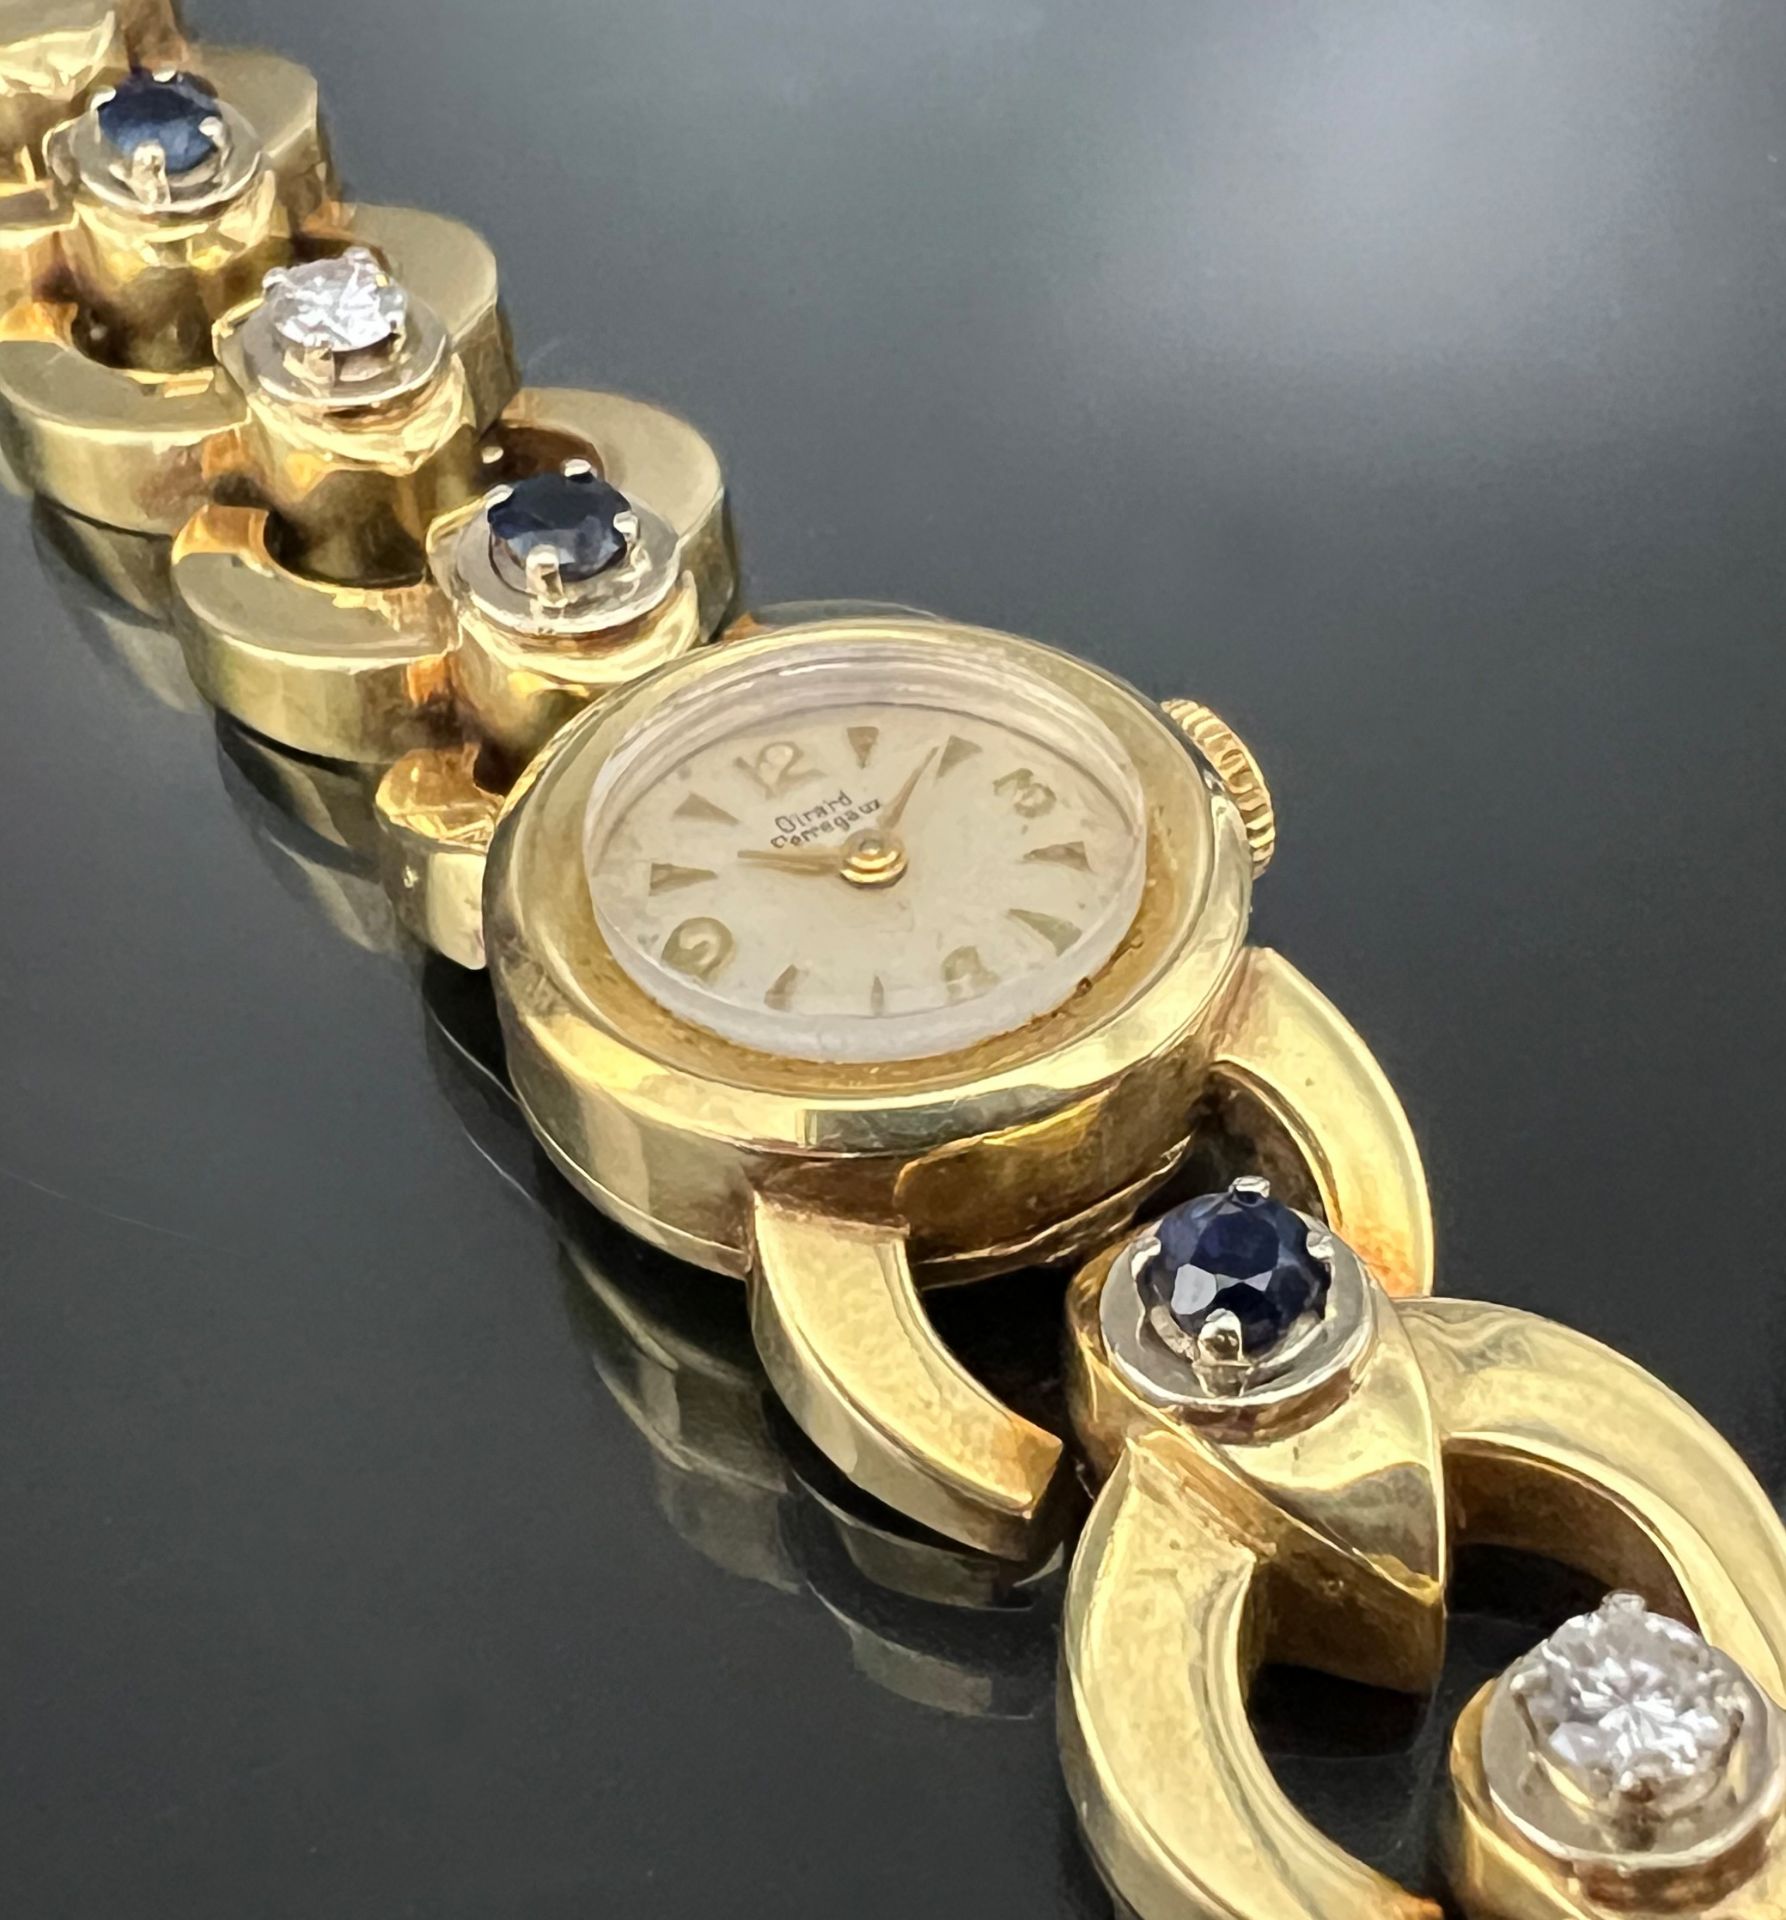 GIRARD-PERREGAUX ladies' wristwatch. 585 yellow gold with 2 diamonds and 4 sapphires. - Image 5 of 10